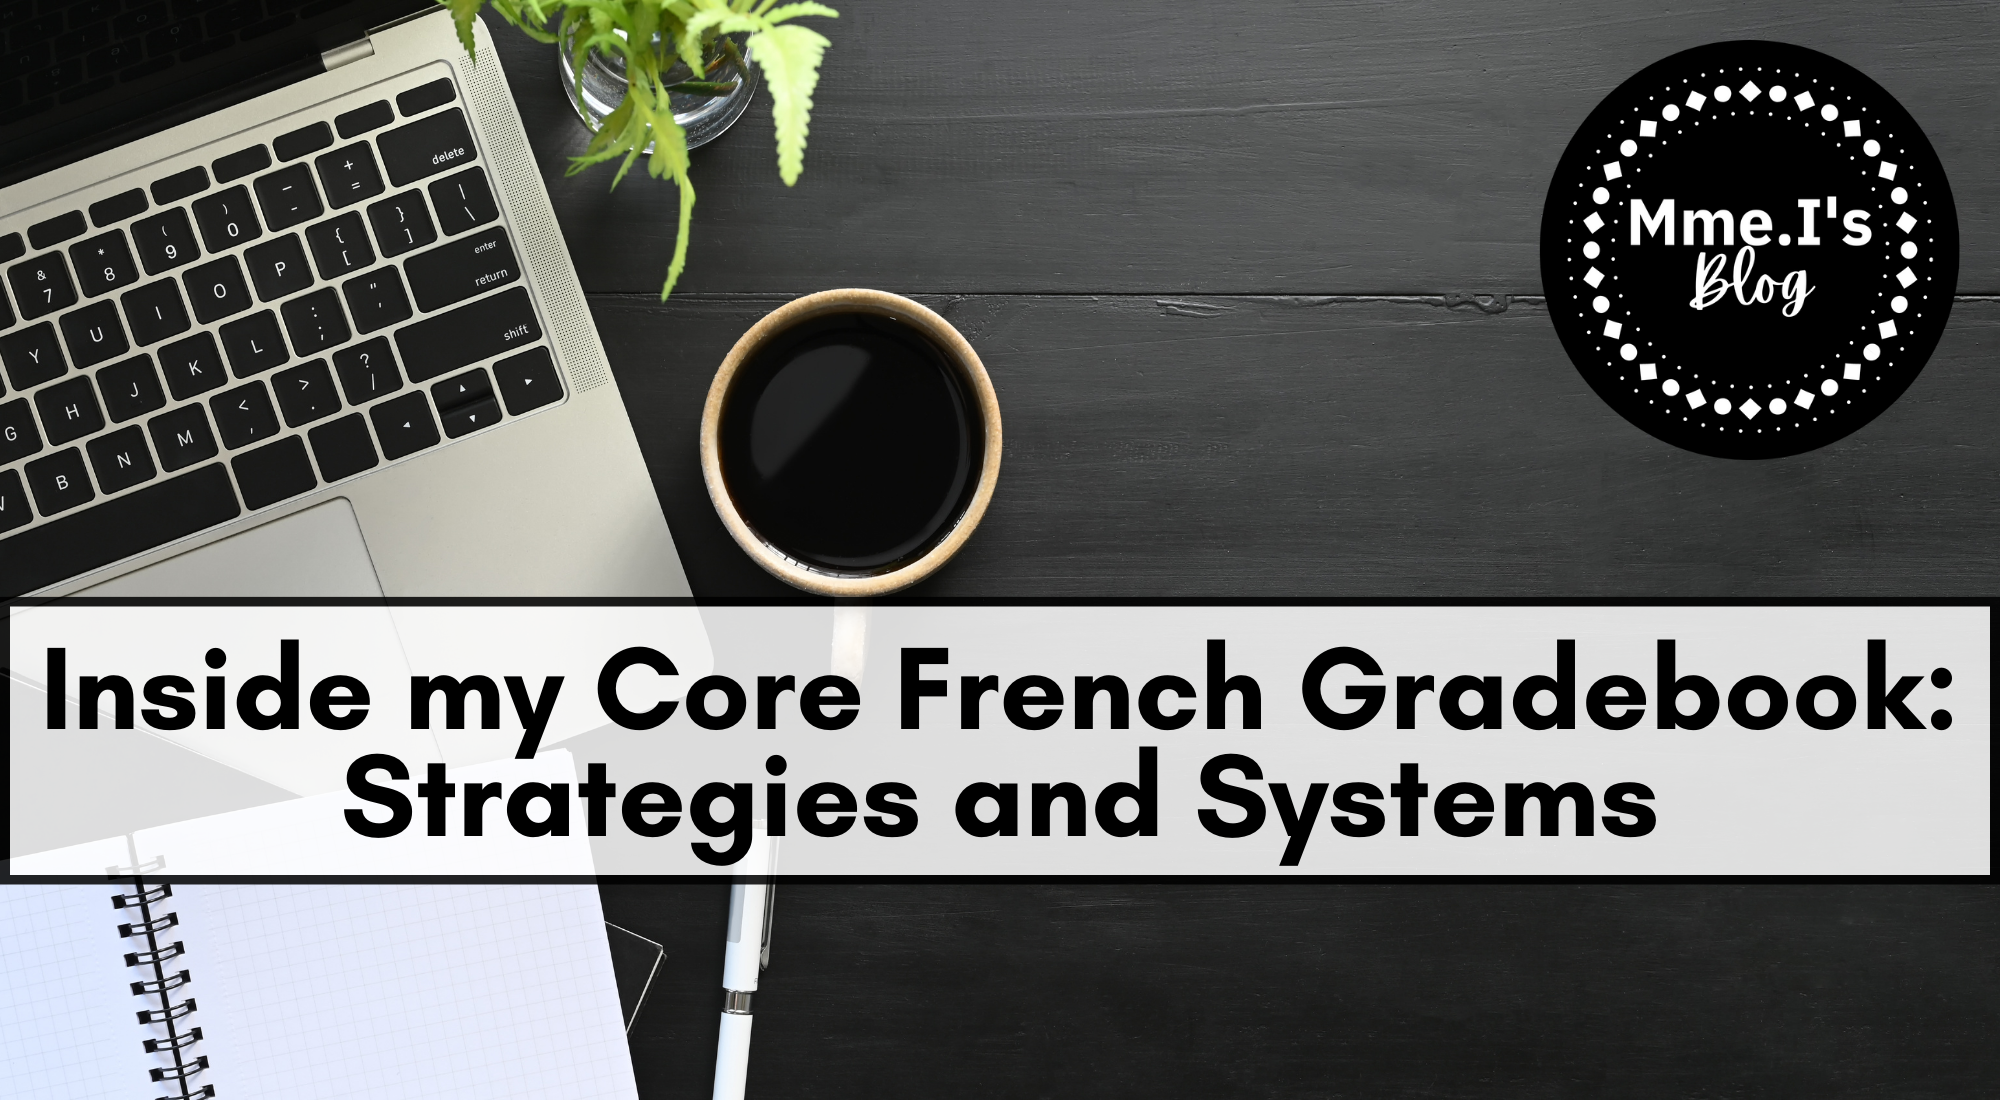 Inside my Core French Gradebook: Strategies and Systems